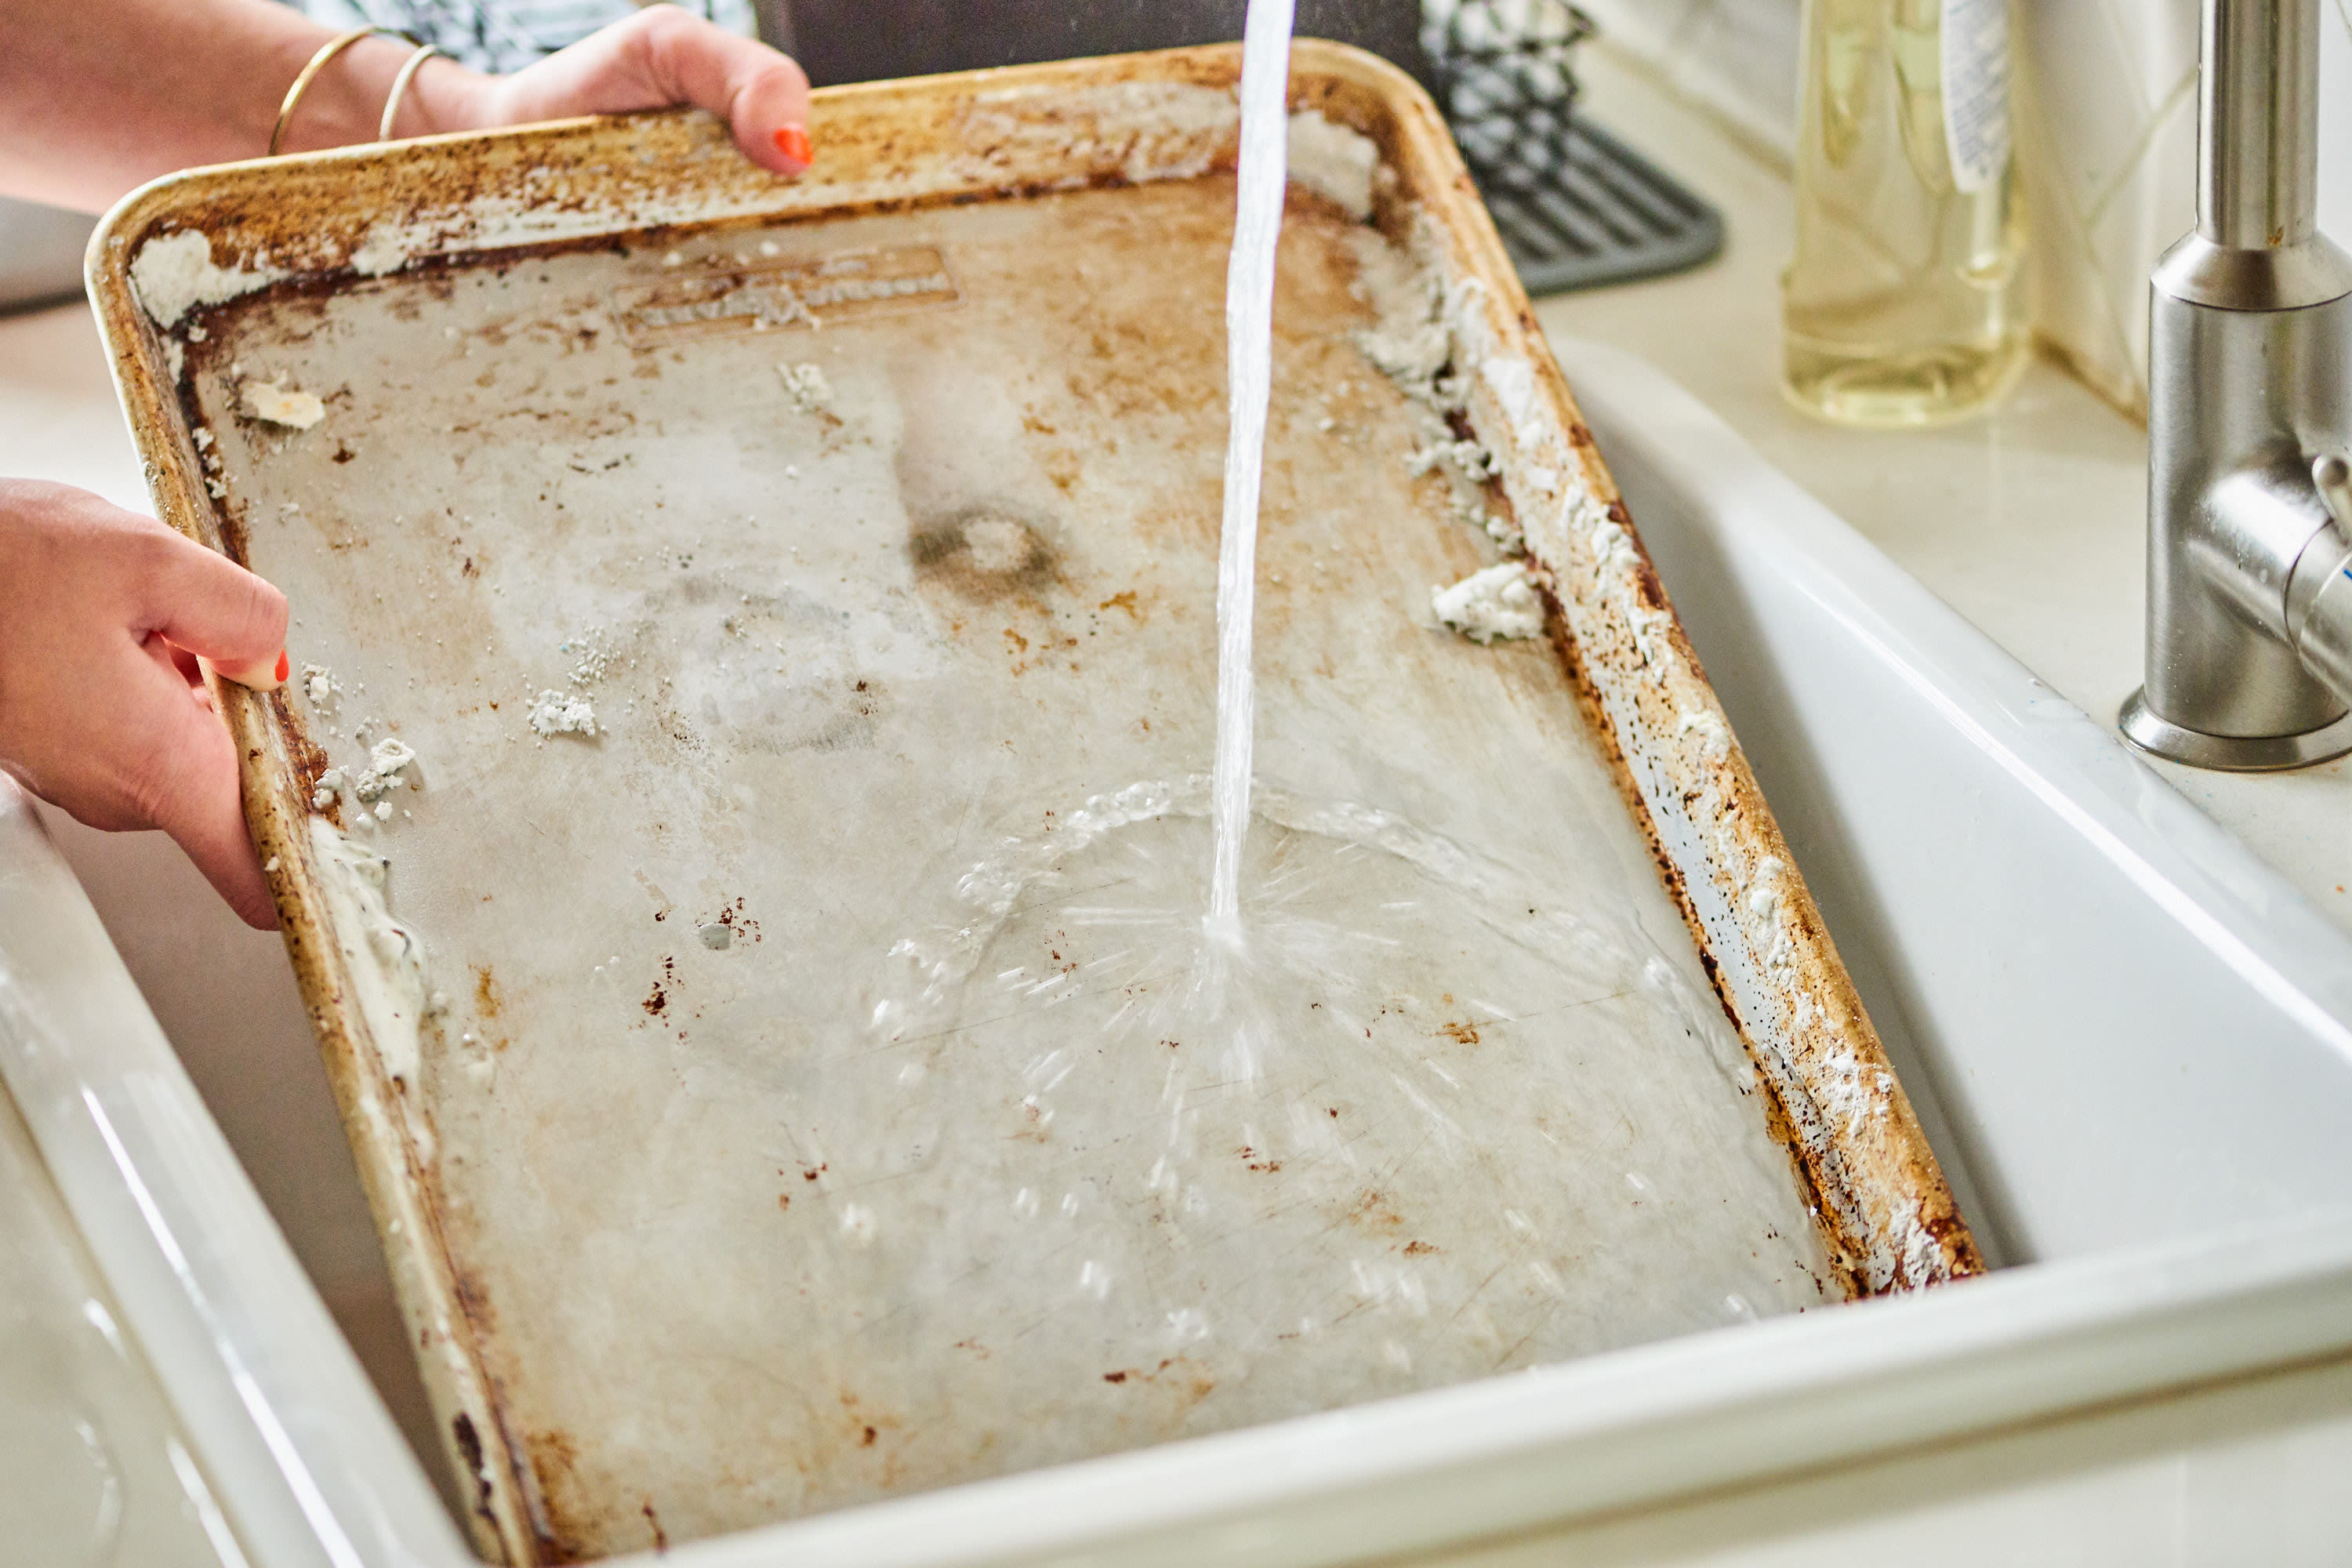 5 Ways to Clean a Stained Baking Sheet 2023